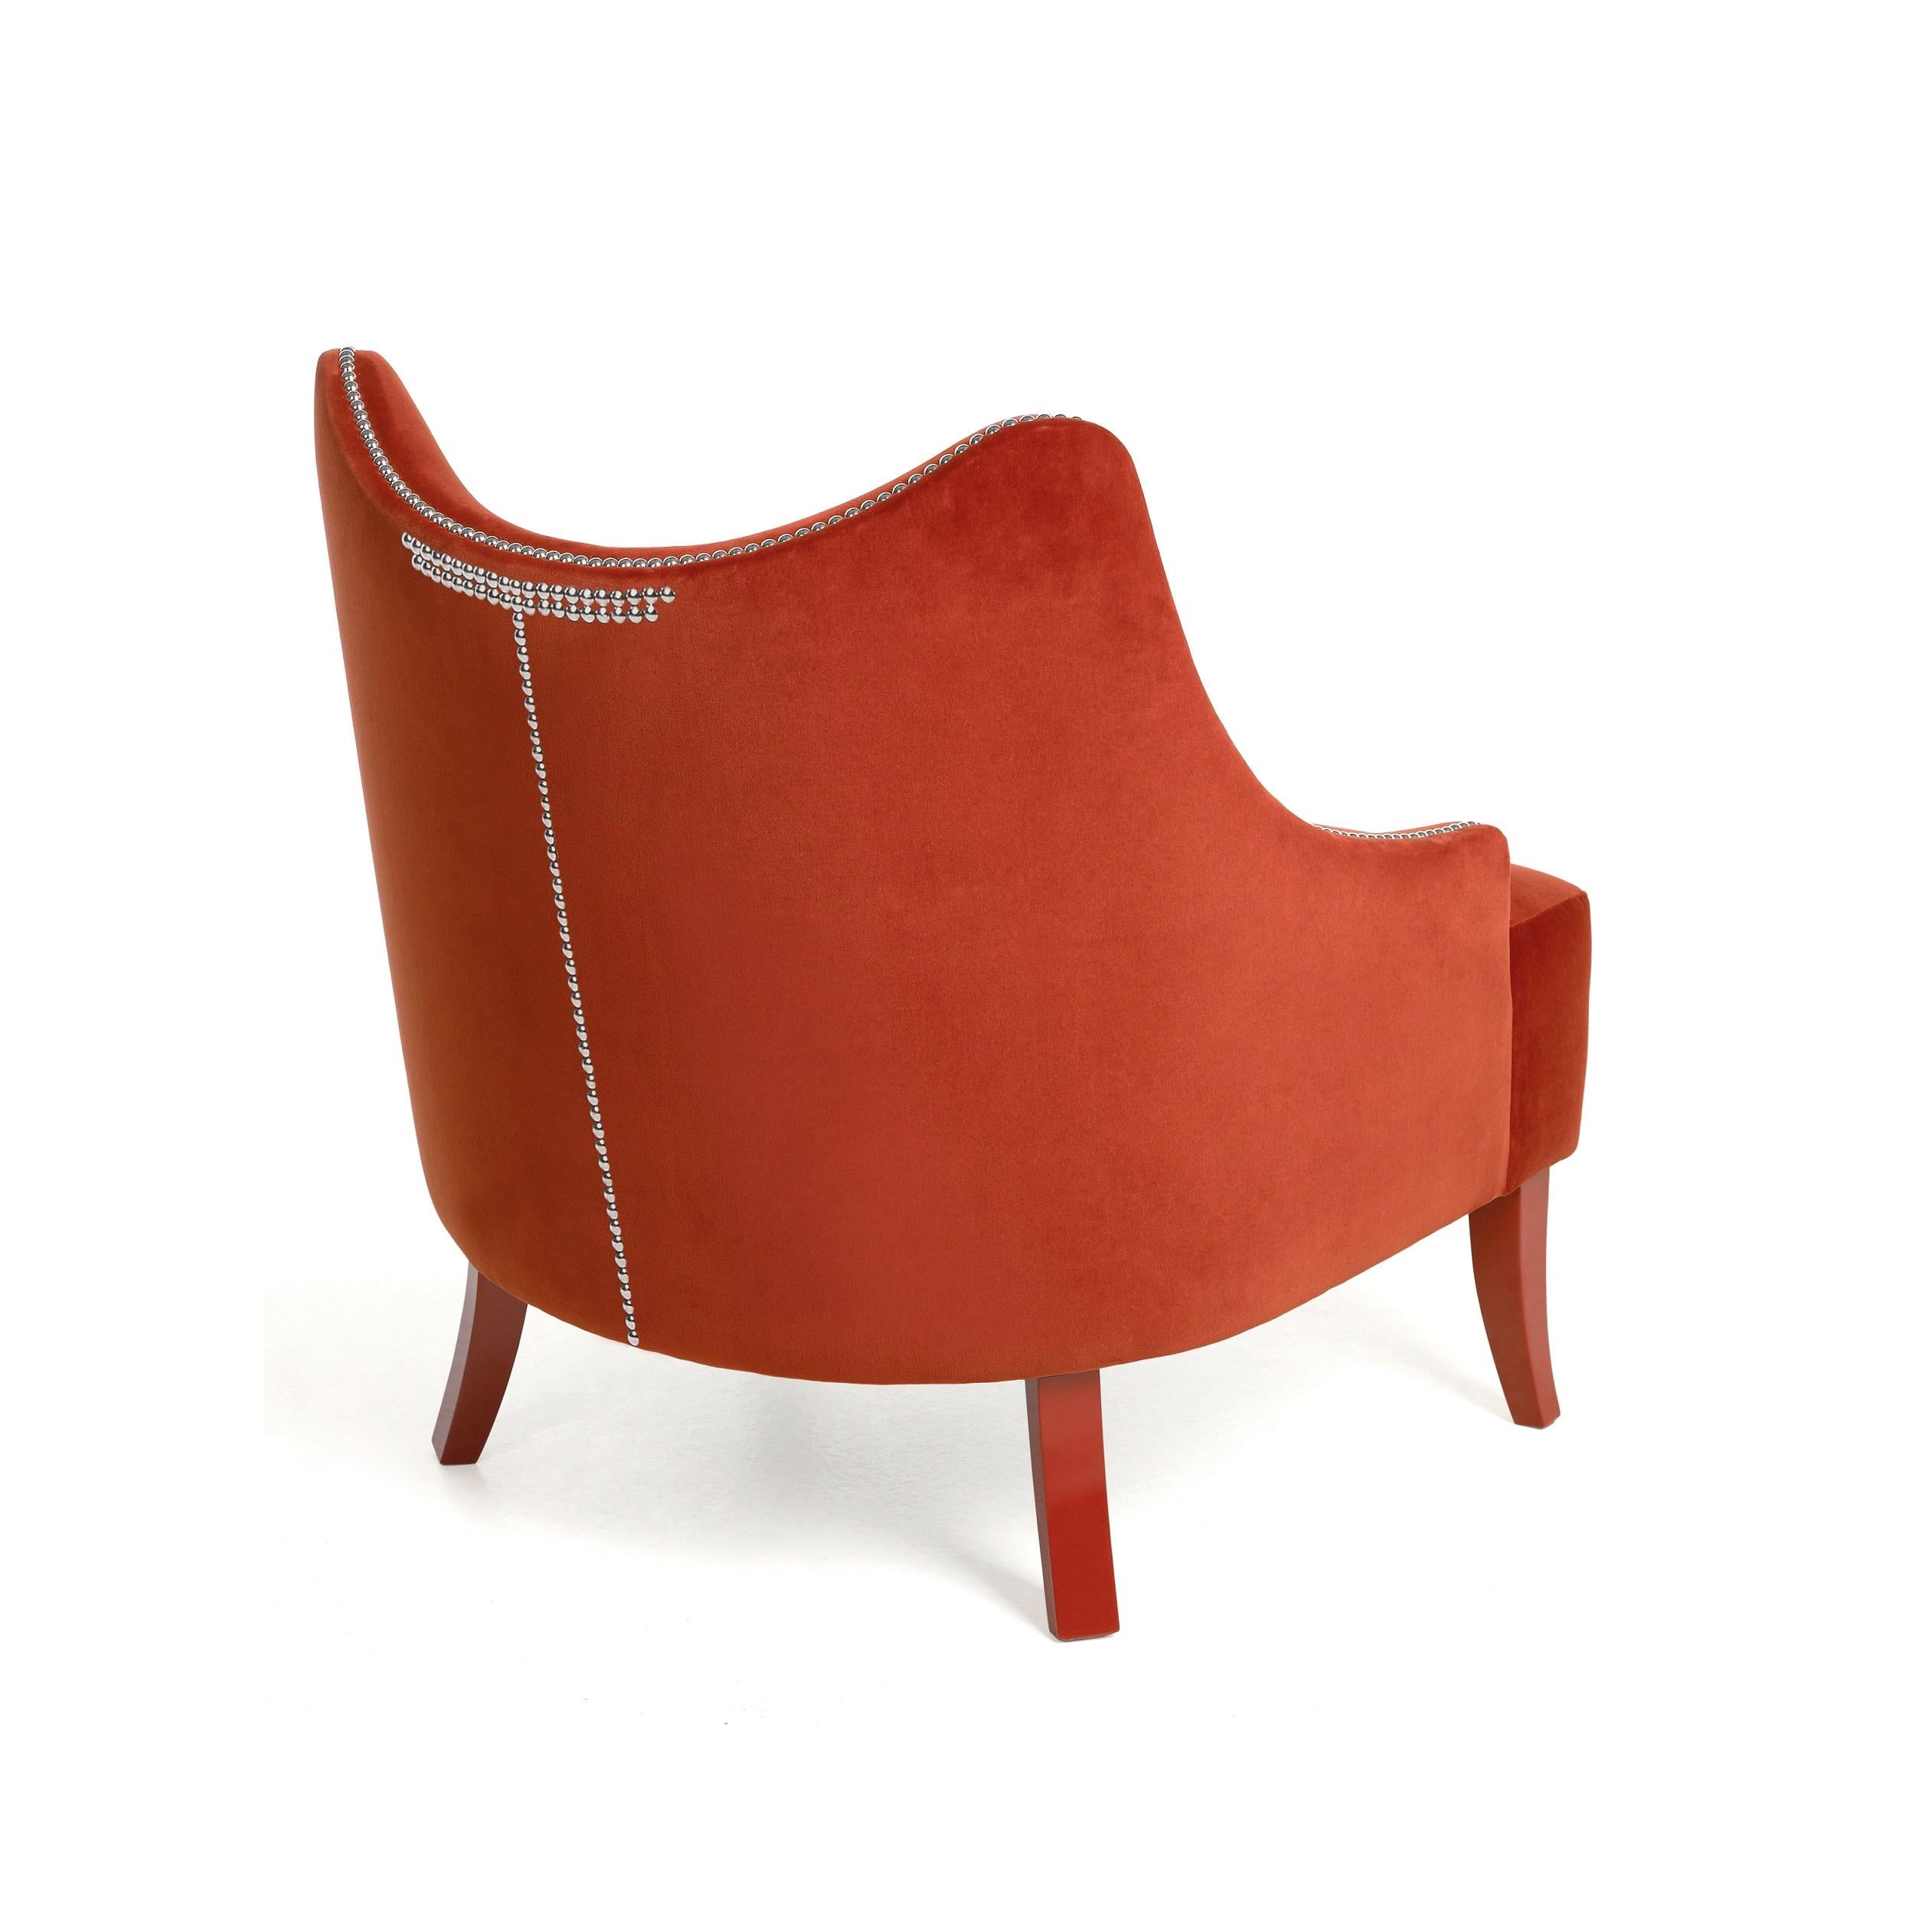 Modern Contemporary Velvet Armchair Offered With Nails On The Curve & Back For Sale